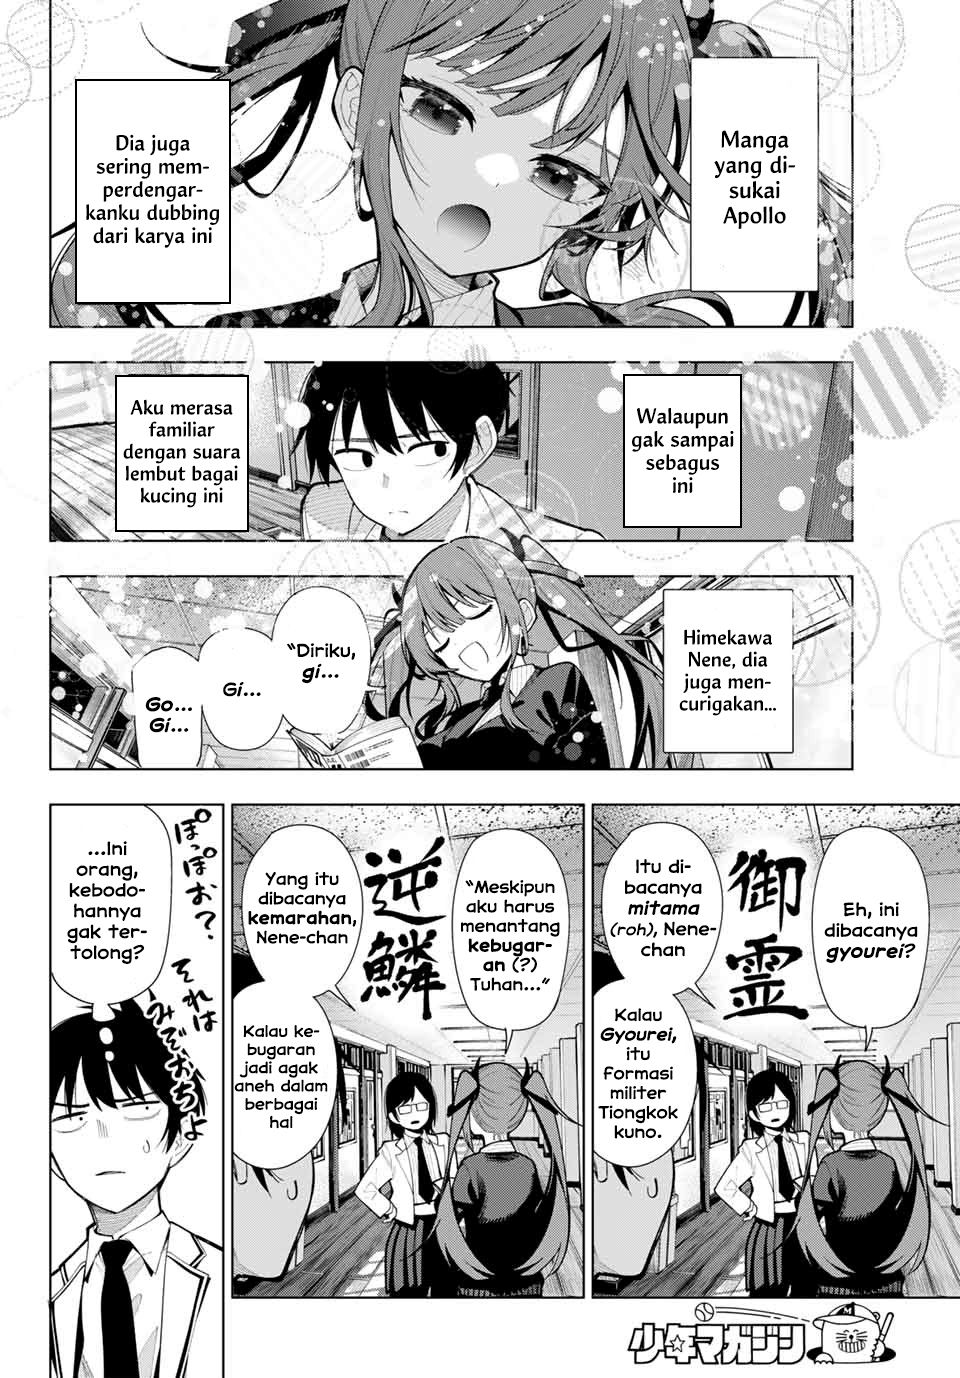 Mayonaka Heart Tune (Tune In to the Midnight Heart) Chapter 02 Image 21